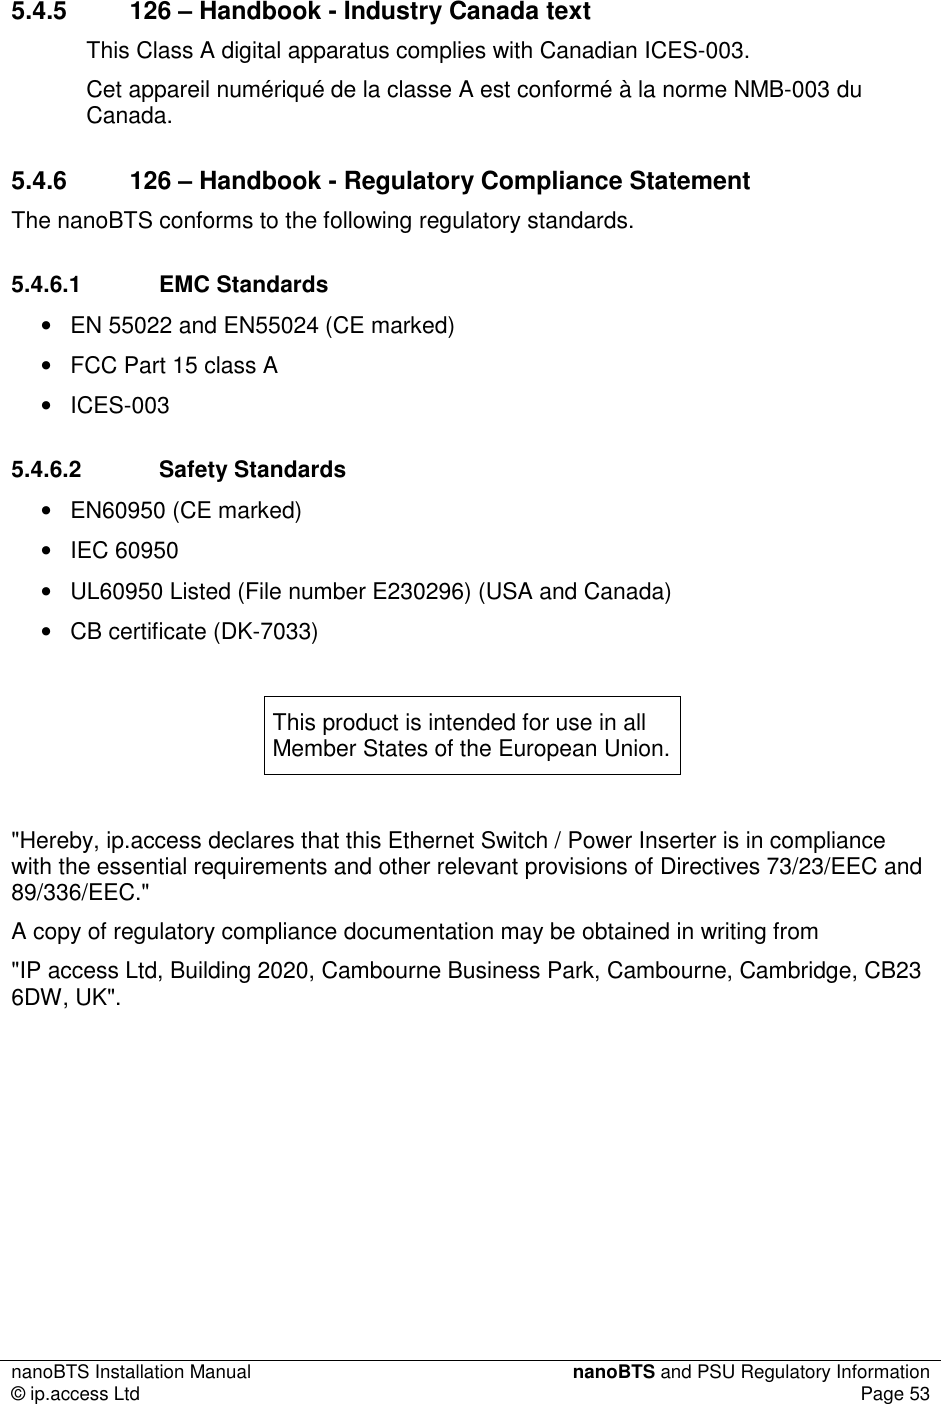 nanoBTS Installation Manual  nanoBTS and PSU Regulatory Information © ip.access Ltd  Page 53   5.4.5  126 – Handbook - Industry Canada text This Class A digital apparatus complies with Canadian ICES-003. Cet appareil numériqué de la classe A est conformé à la norme NMB-003 du Canada. 5.4.6  126 – Handbook - Regulatory Compliance Statement The nanoBTS conforms to the following regulatory standards. 5.4.6.1  EMC Standards •  EN 55022 and EN55024 (CE marked) •  FCC Part 15 class A •  ICES-003 5.4.6.2  Safety Standards •  EN60950 (CE marked) •  IEC 60950 •  UL60950 Listed (File number E230296) (USA and Canada) •  CB certificate (DK-7033)  This product is intended for use in all Member States of the European Union.  &quot;Hereby, ip.access declares that this Ethernet Switch / Power Inserter is in compliance with the essential requirements and other relevant provisions of Directives 73/23/EEC and 89/336/EEC.&quot; A copy of regulatory compliance documentation may be obtained in writing from &quot;IP access Ltd, Building 2020, Cambourne Business Park, Cambourne, Cambridge, CB23 6DW, UK&quot;. 